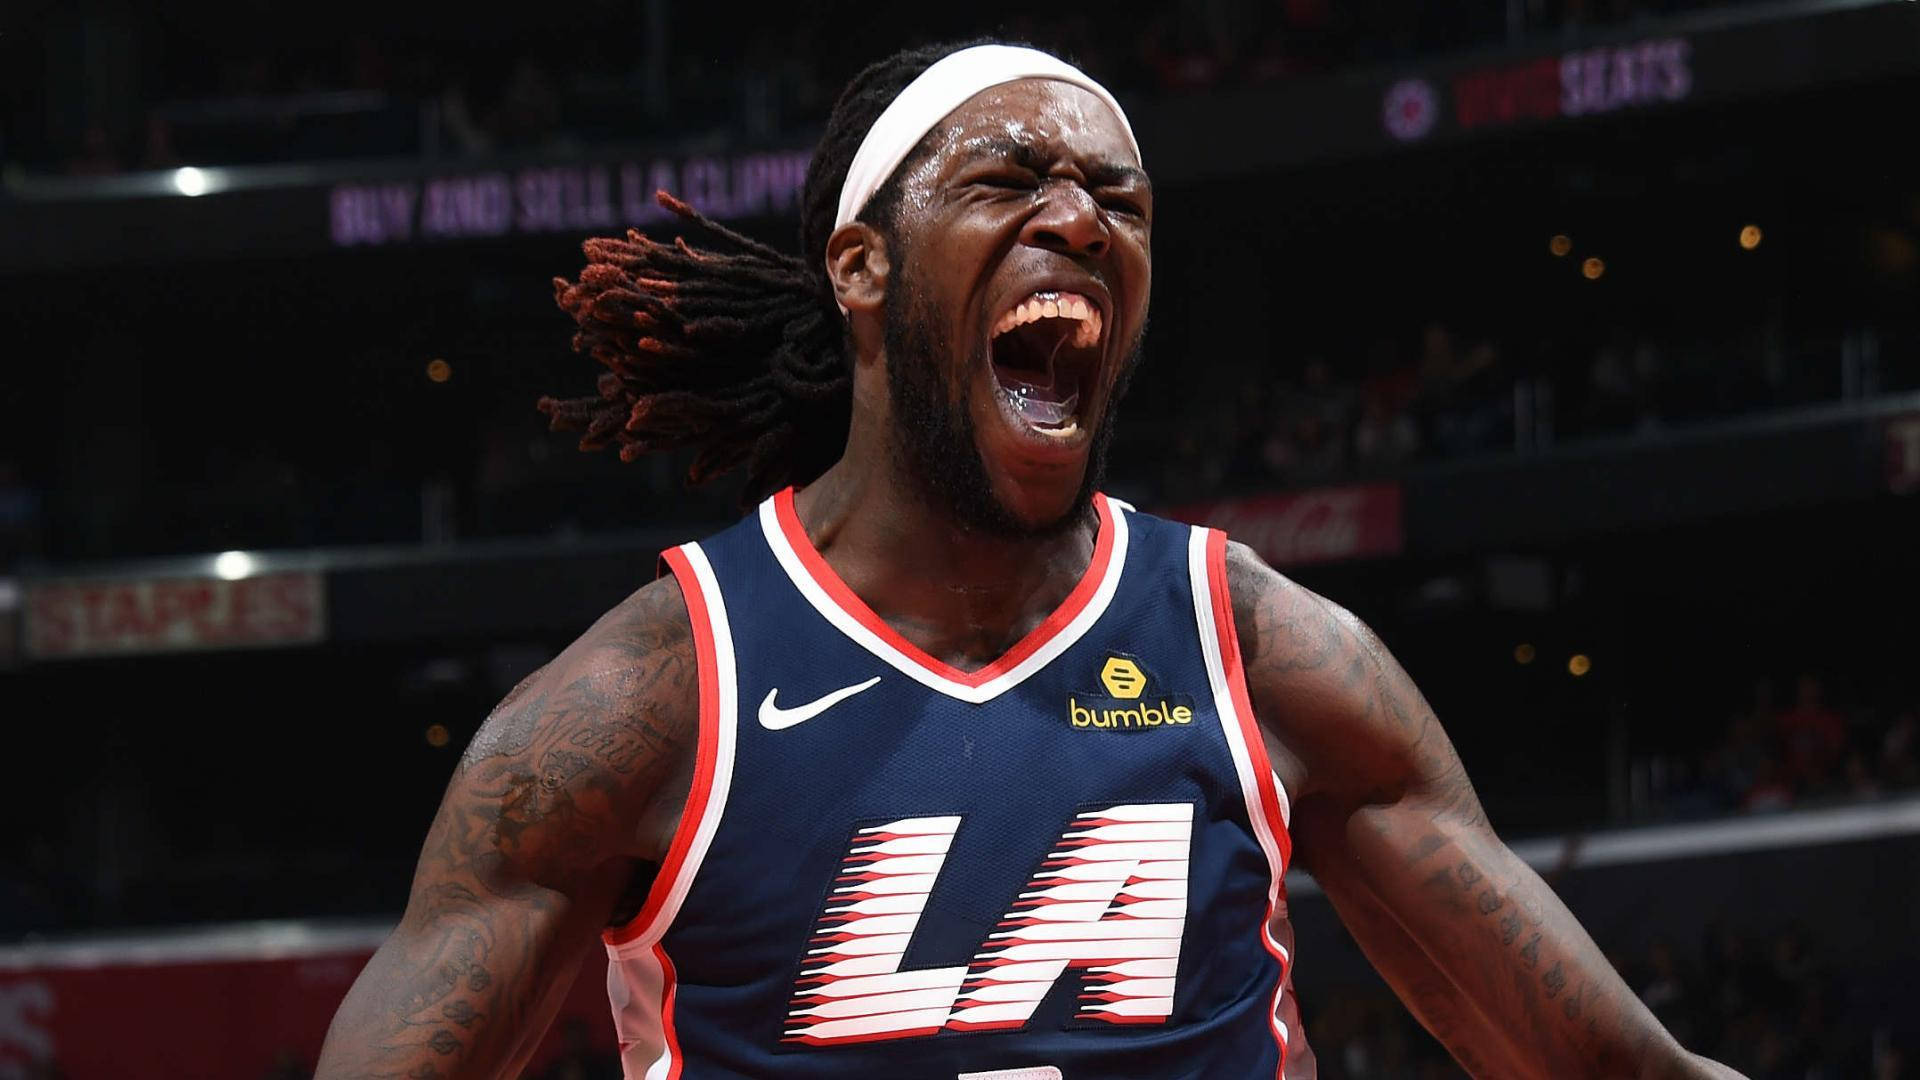 Montrezl Harrell In A Display Of Passion During A Game Background